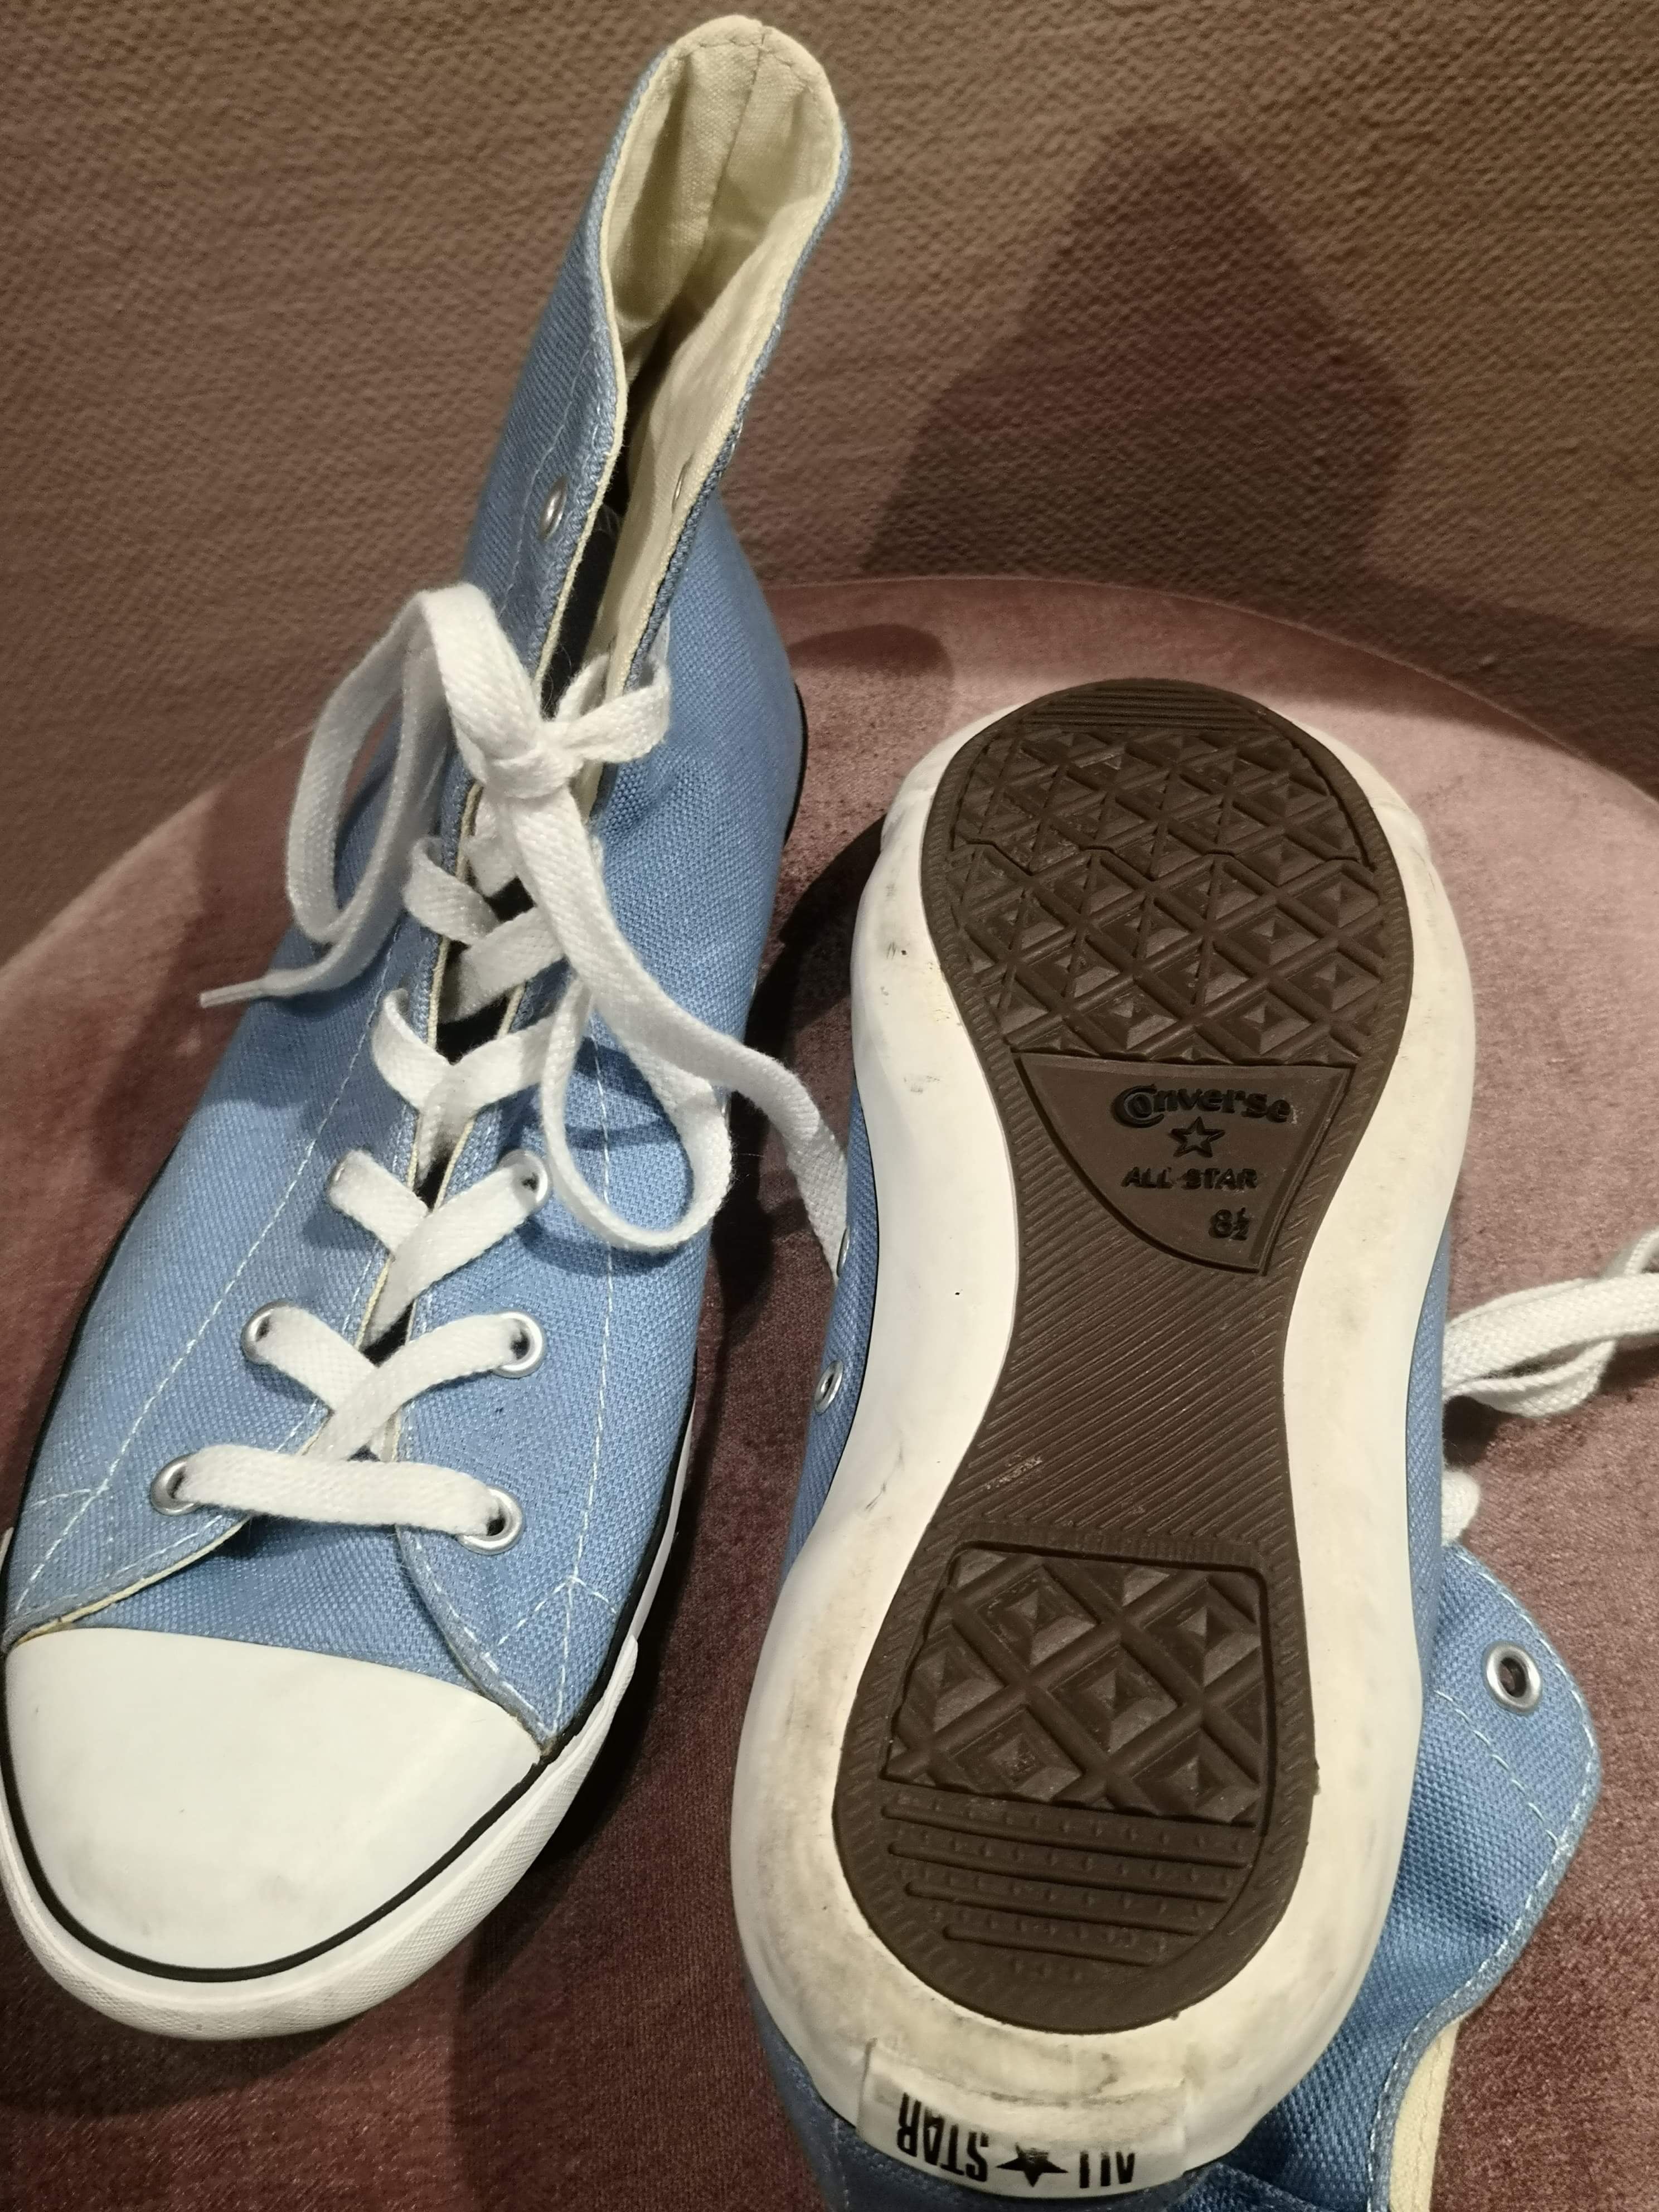 Converse - Sneakers - Size: 40